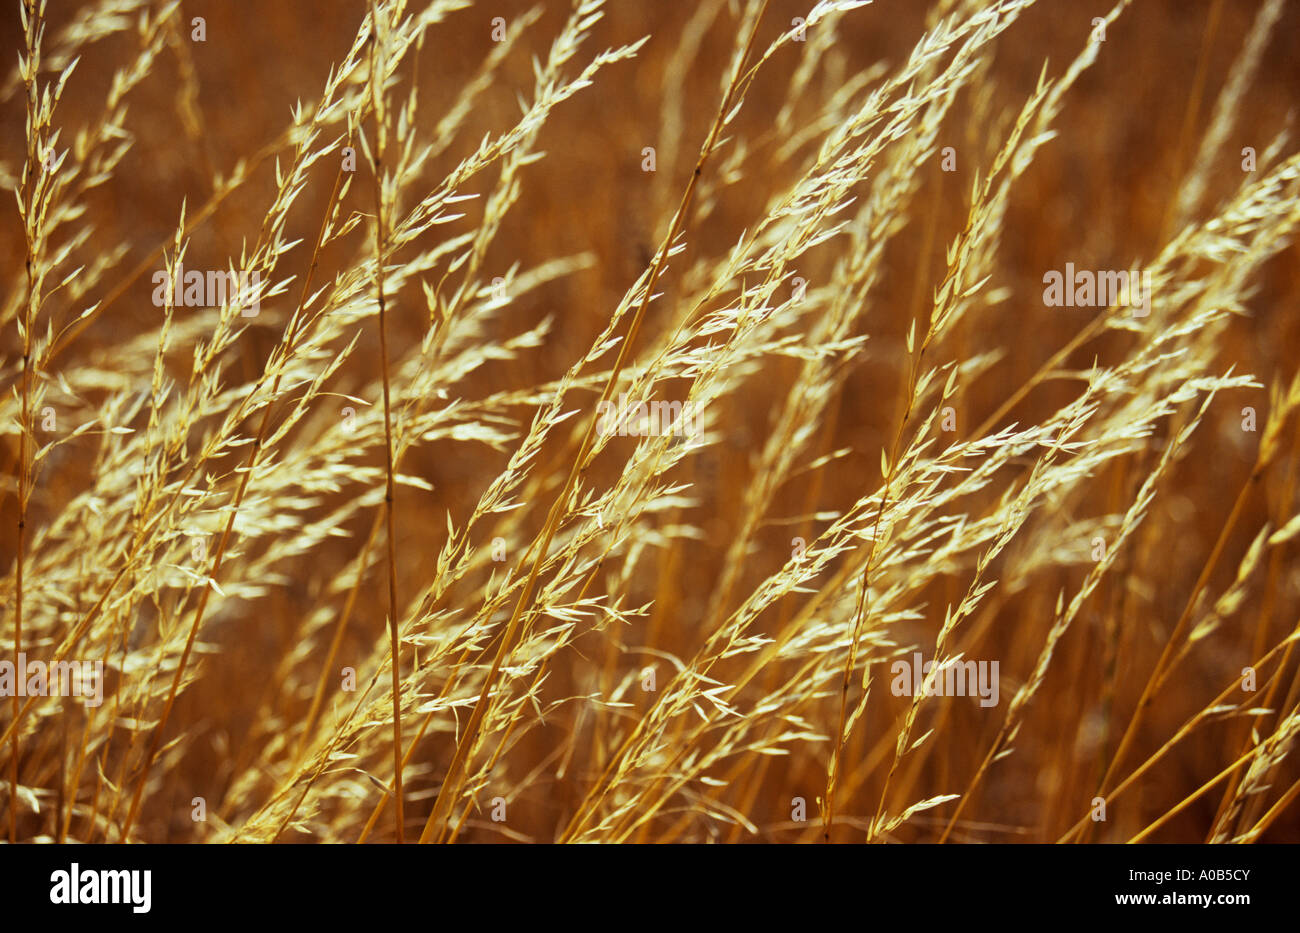 Close up of backlit ripened or emptied seedheads of Red or Creeping fescue grass or Festuca rubra with golden brown wheat Stock Photo